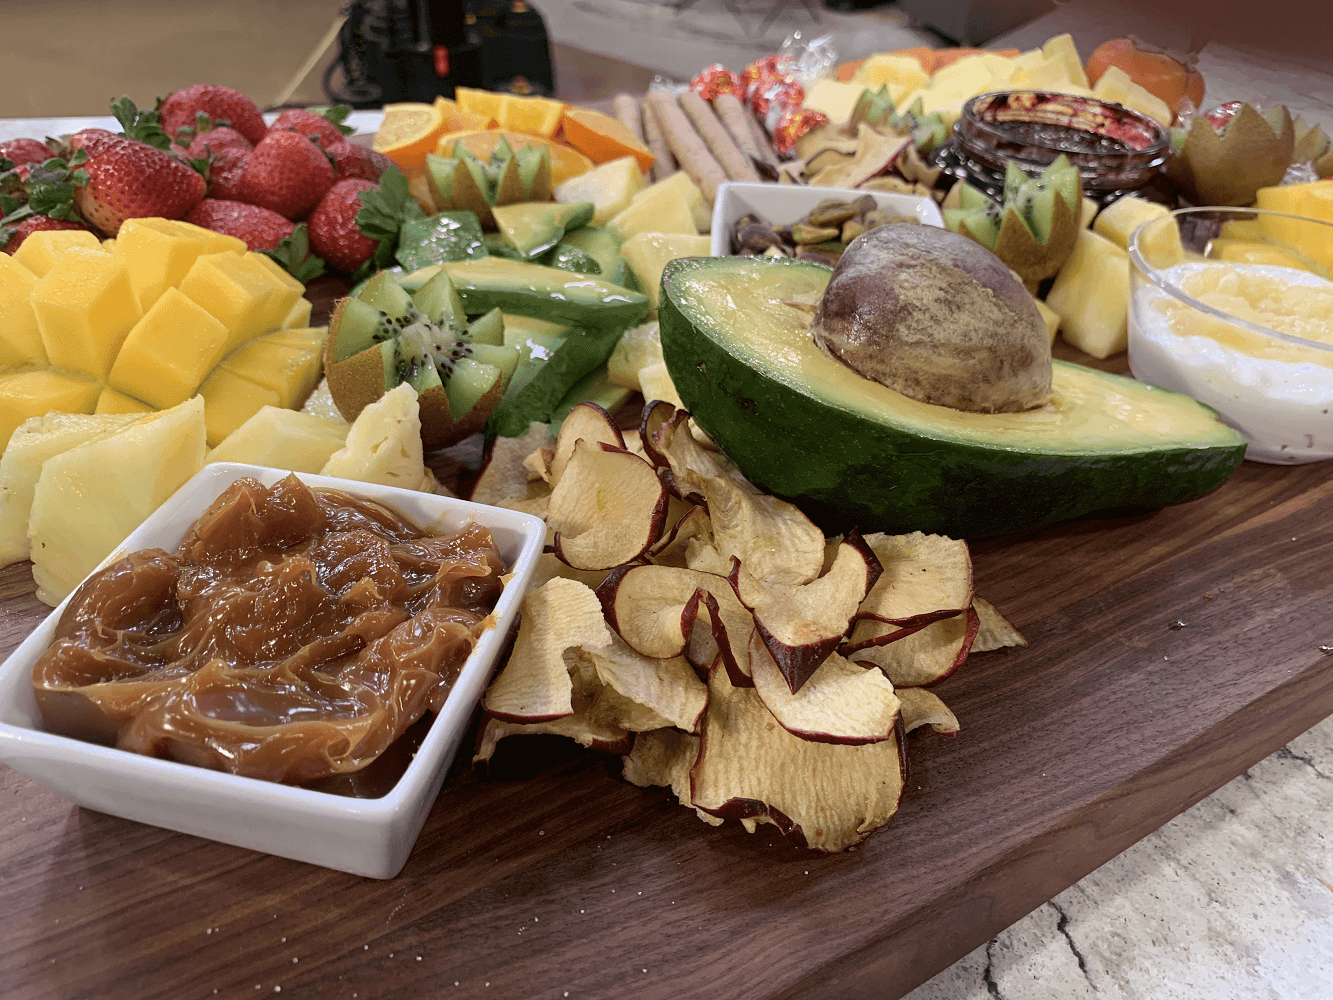 Delicious dips and delectable fruits